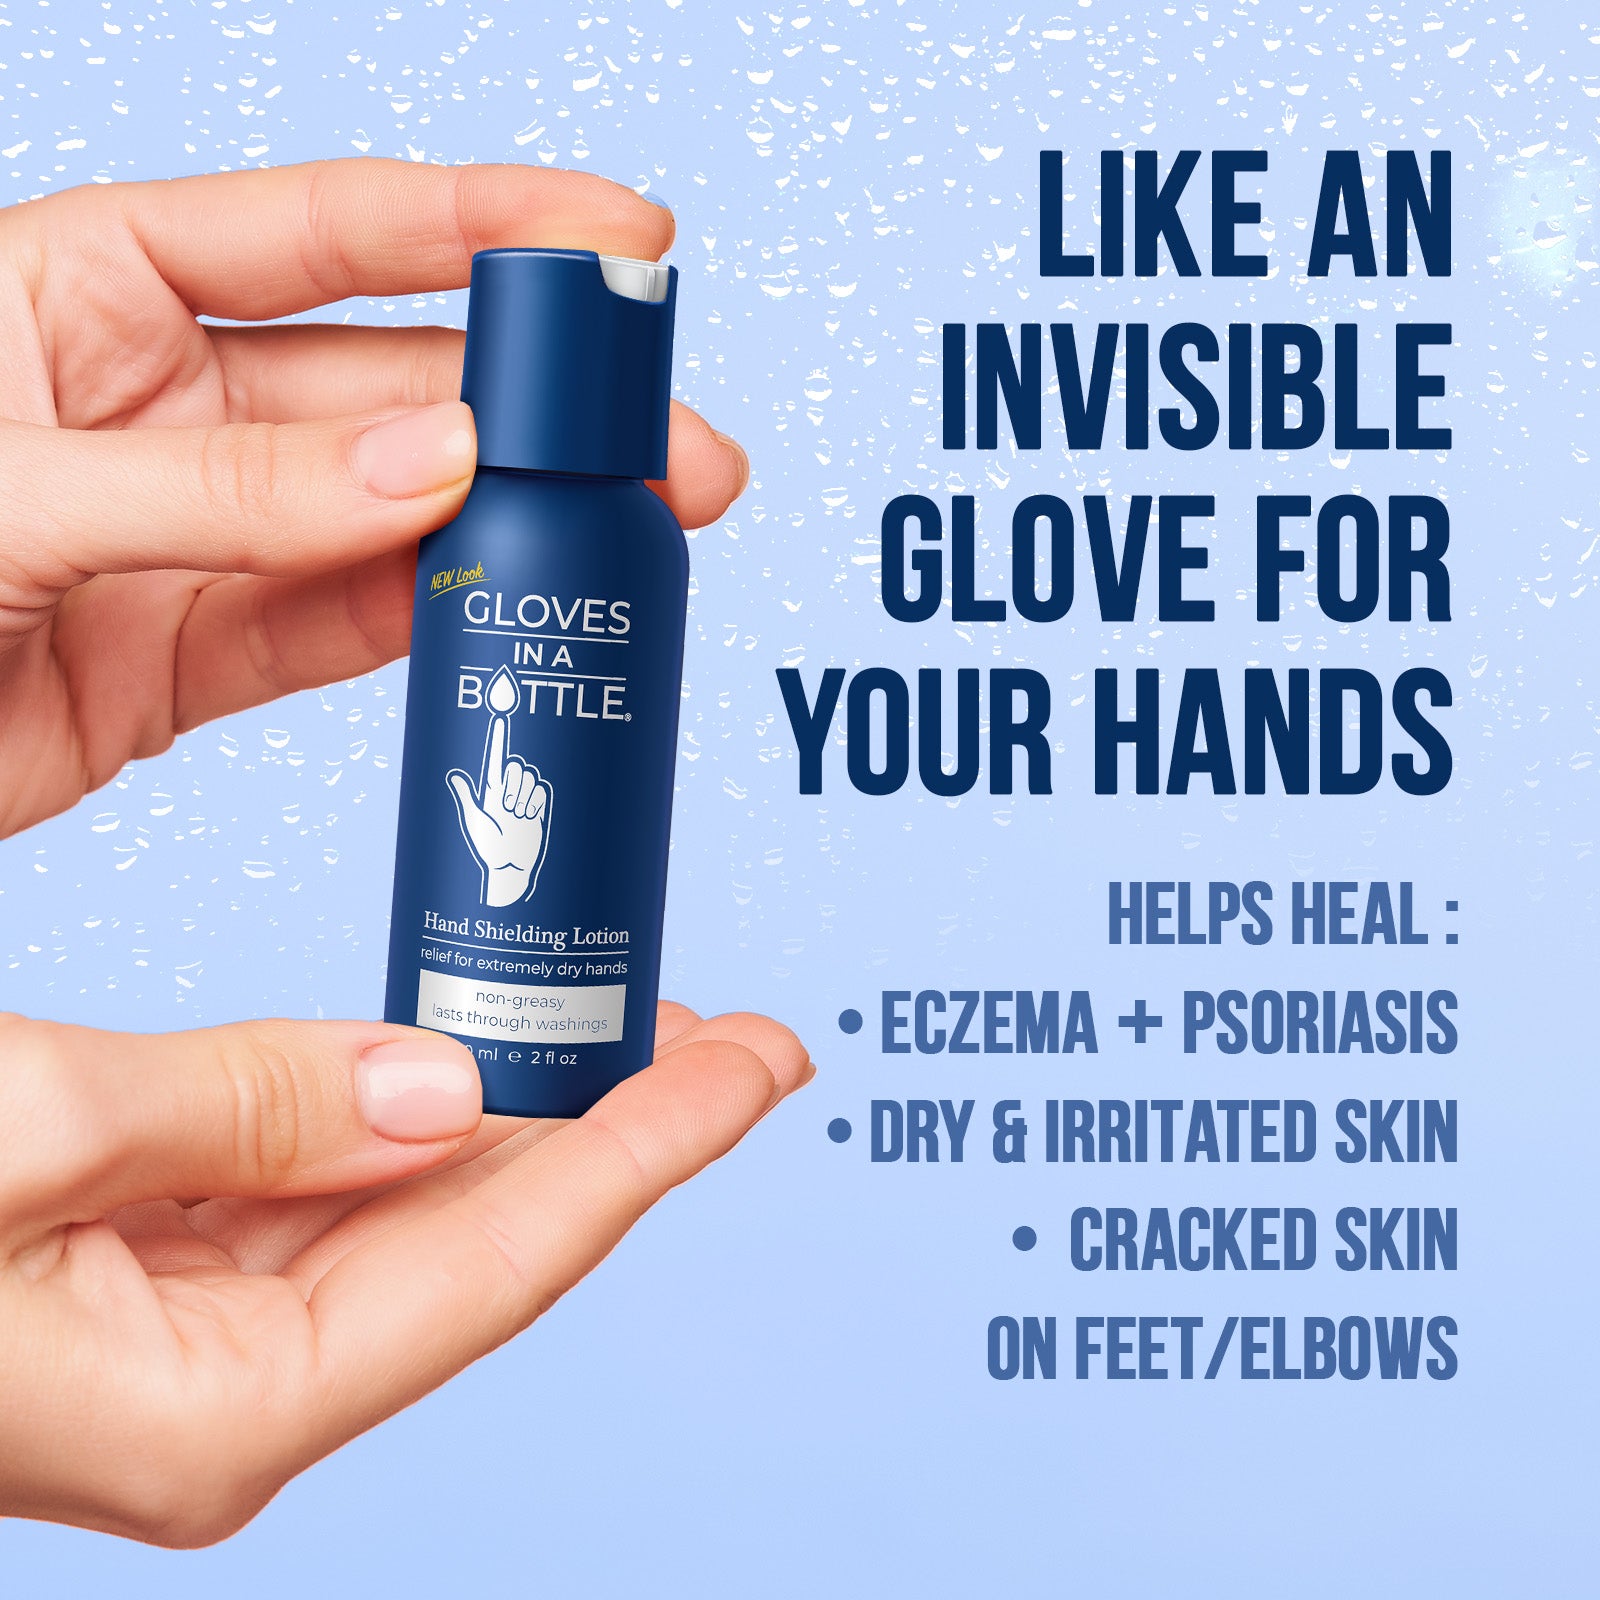 Gloves In A Bottle Travel Size Hand Lotion, 2 pack